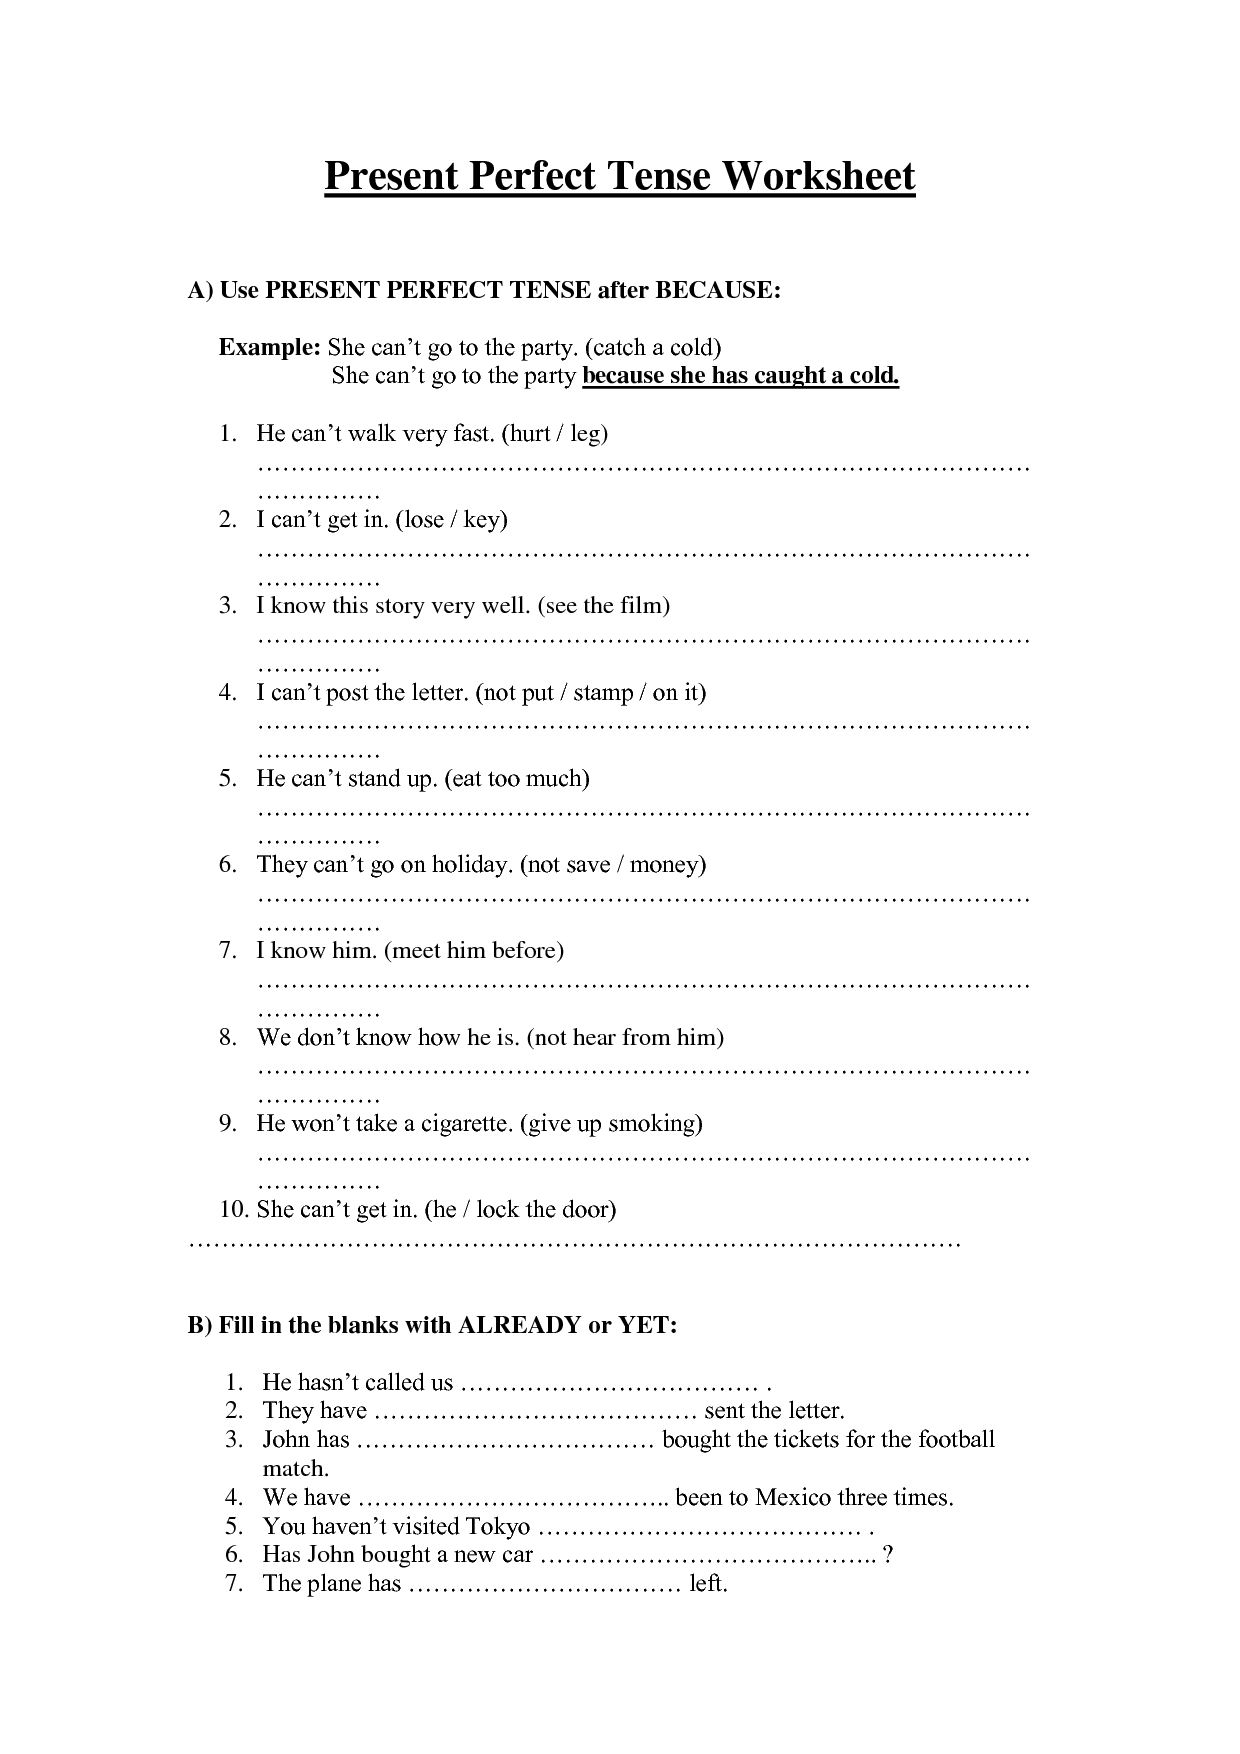 tense-review-worksheet-simple-past-present-perfect-past-perfect